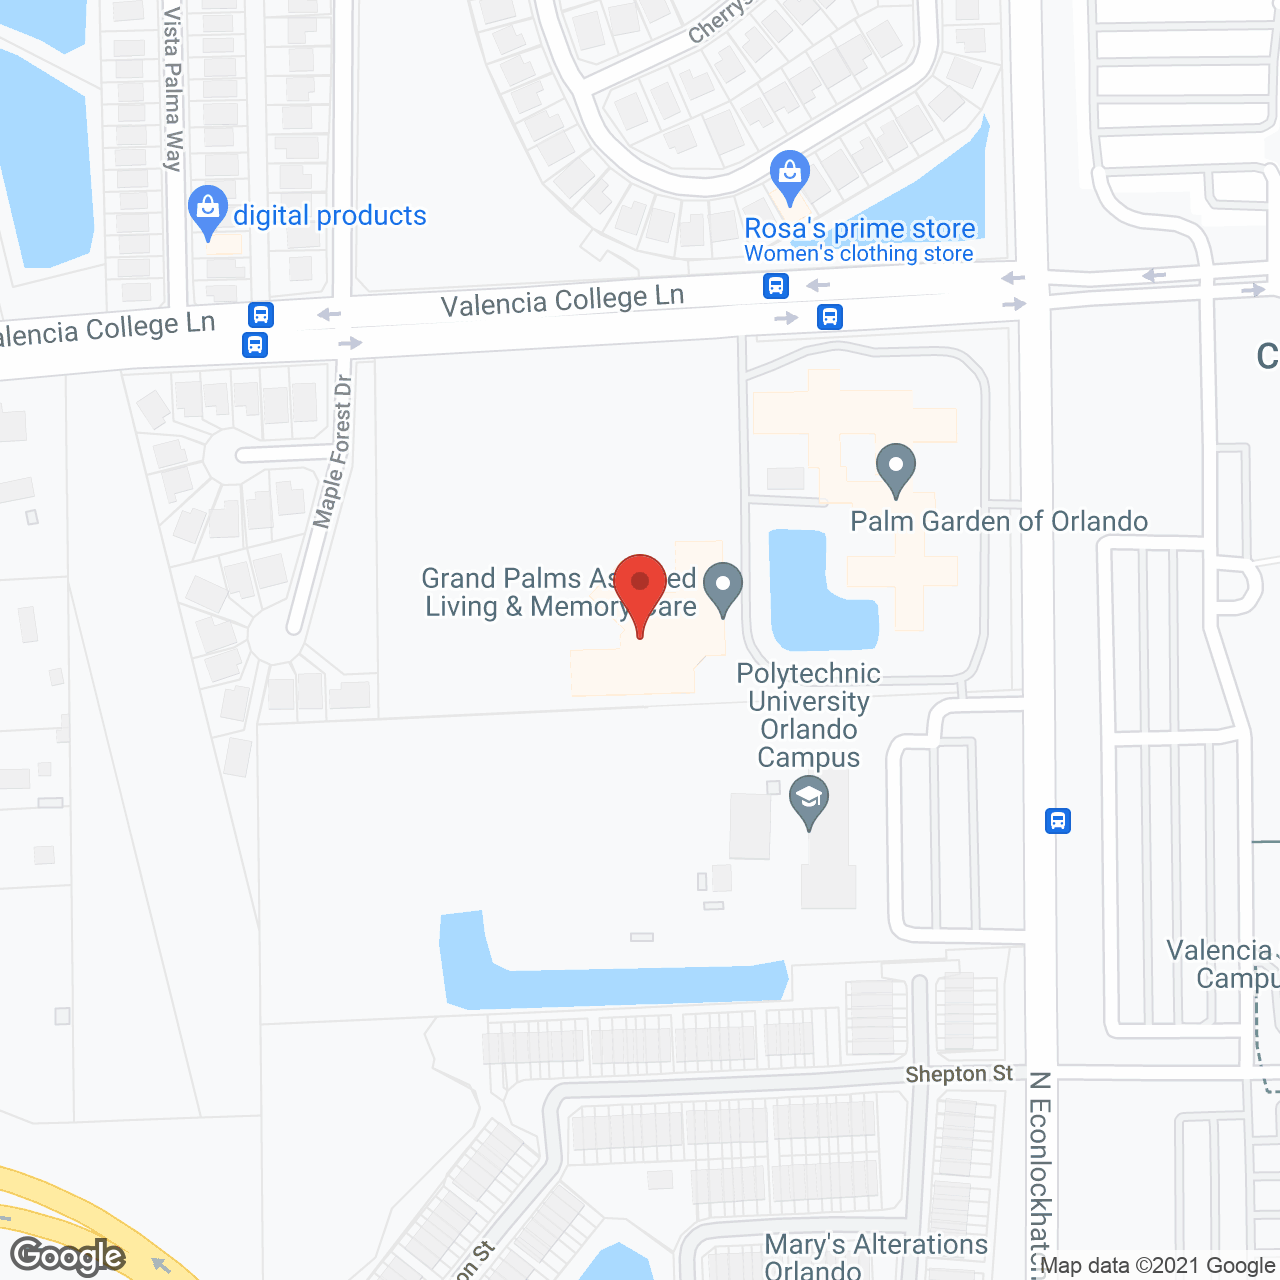 Grand Palms Assisted Living and Memory Care in google map